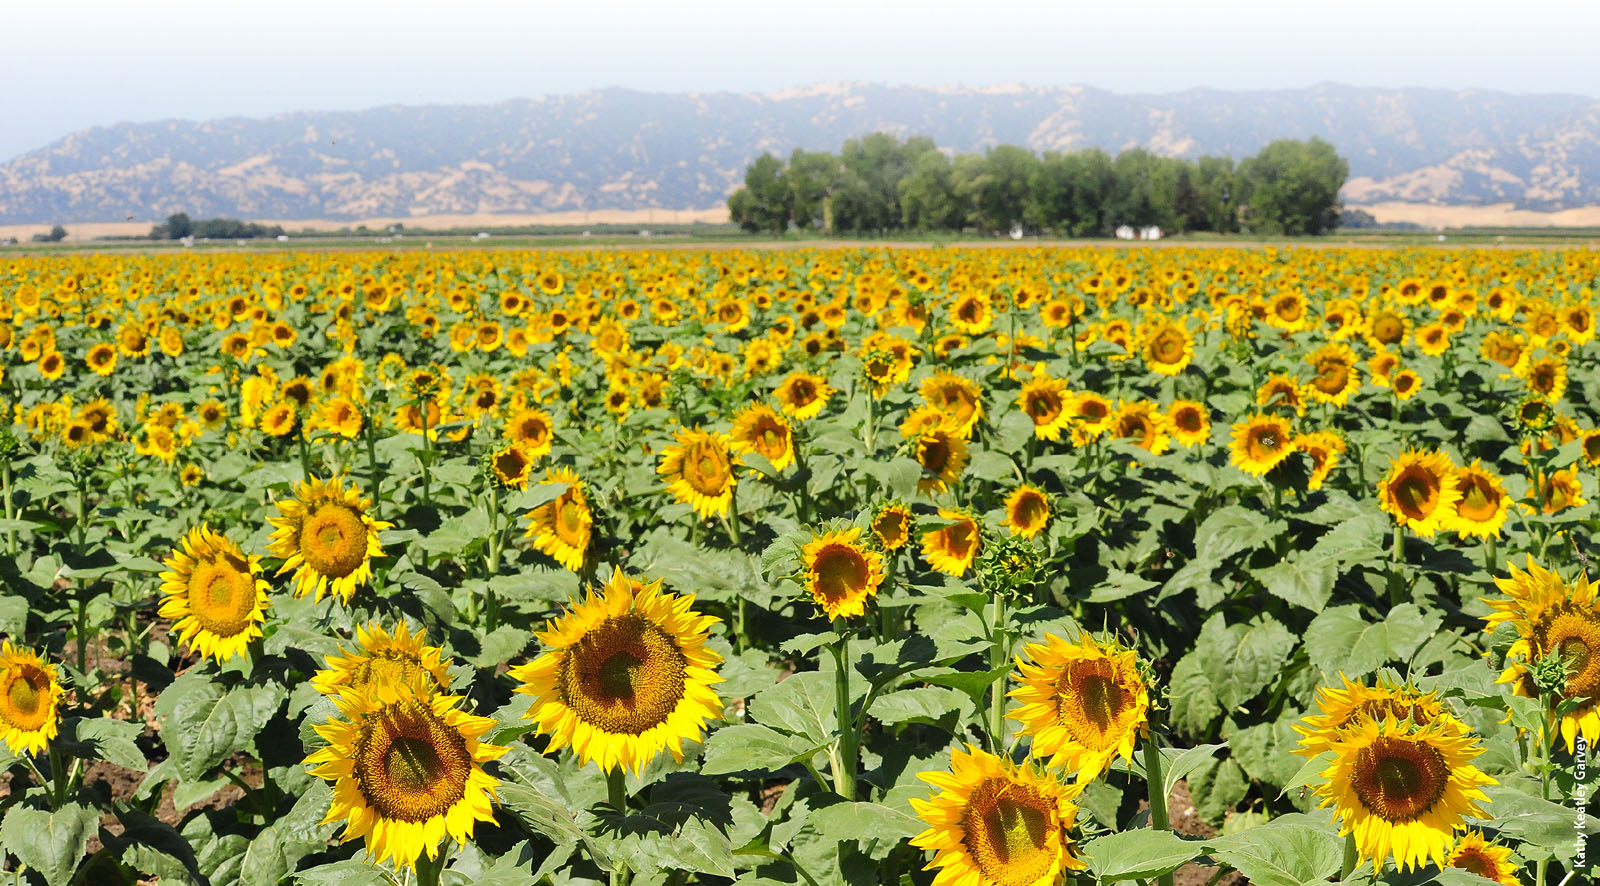 In 2013, researchers sampled five drip- and five furrow-irrigated sites in Yolo County at peak sunflower bloom (July to August).